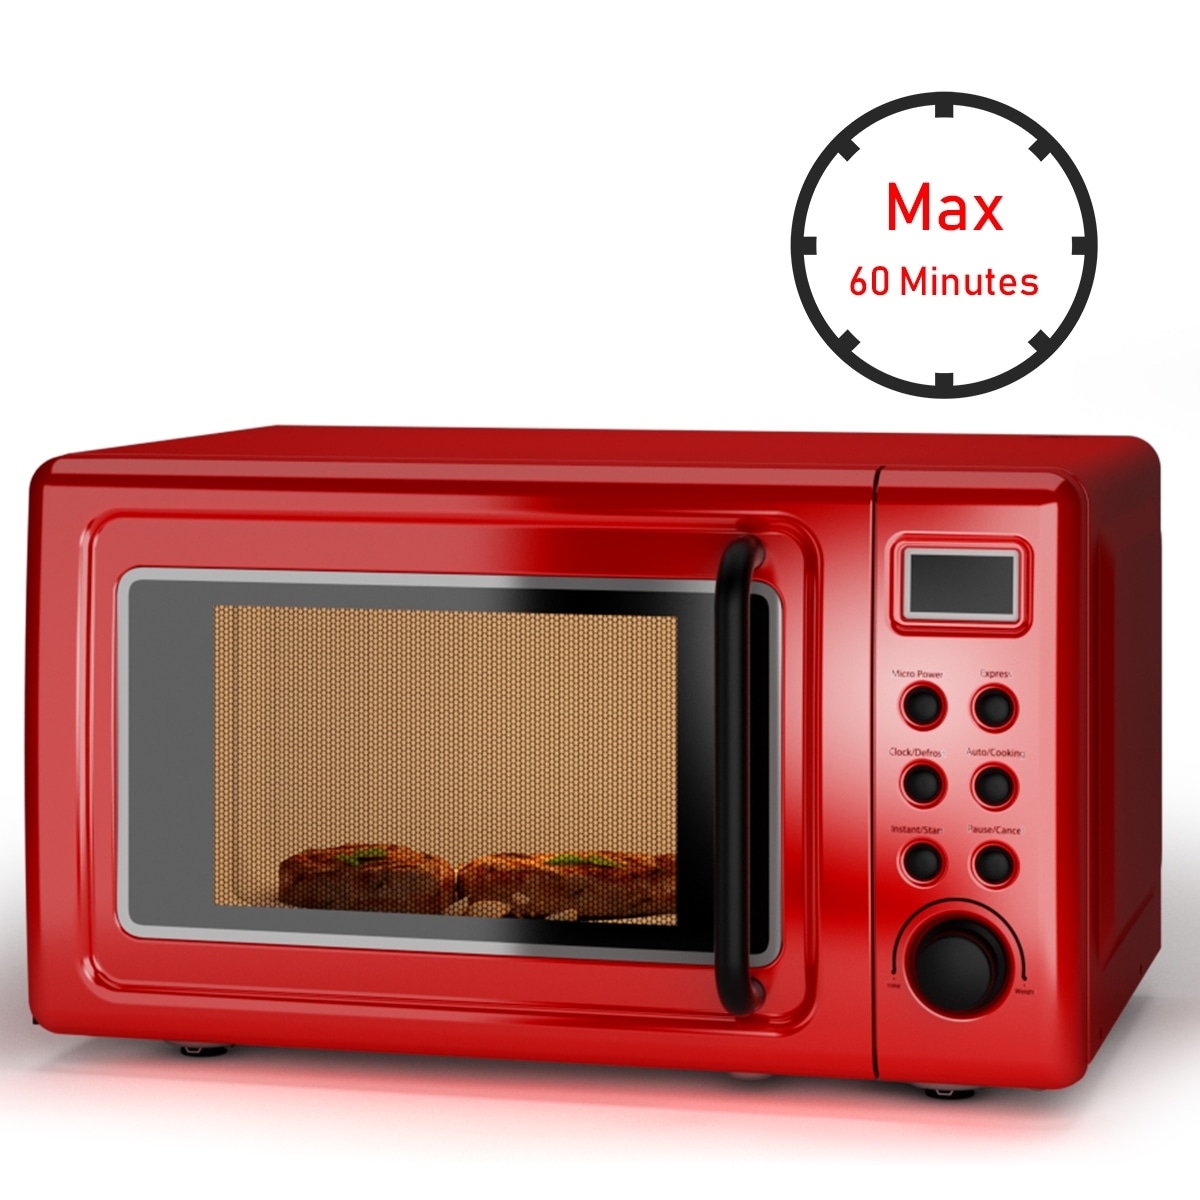 https://ak1.ostkcdn.com/images/products/is/images/direct/92ee416d7bf892a891d5d74451a15d360d16dda9/Costway-0.7Cu.ft-Retro-Countertop-Microwave-Oven-700W-LED-Display-Glass-Turntable-RedGreenblack-rose-gold.jpg